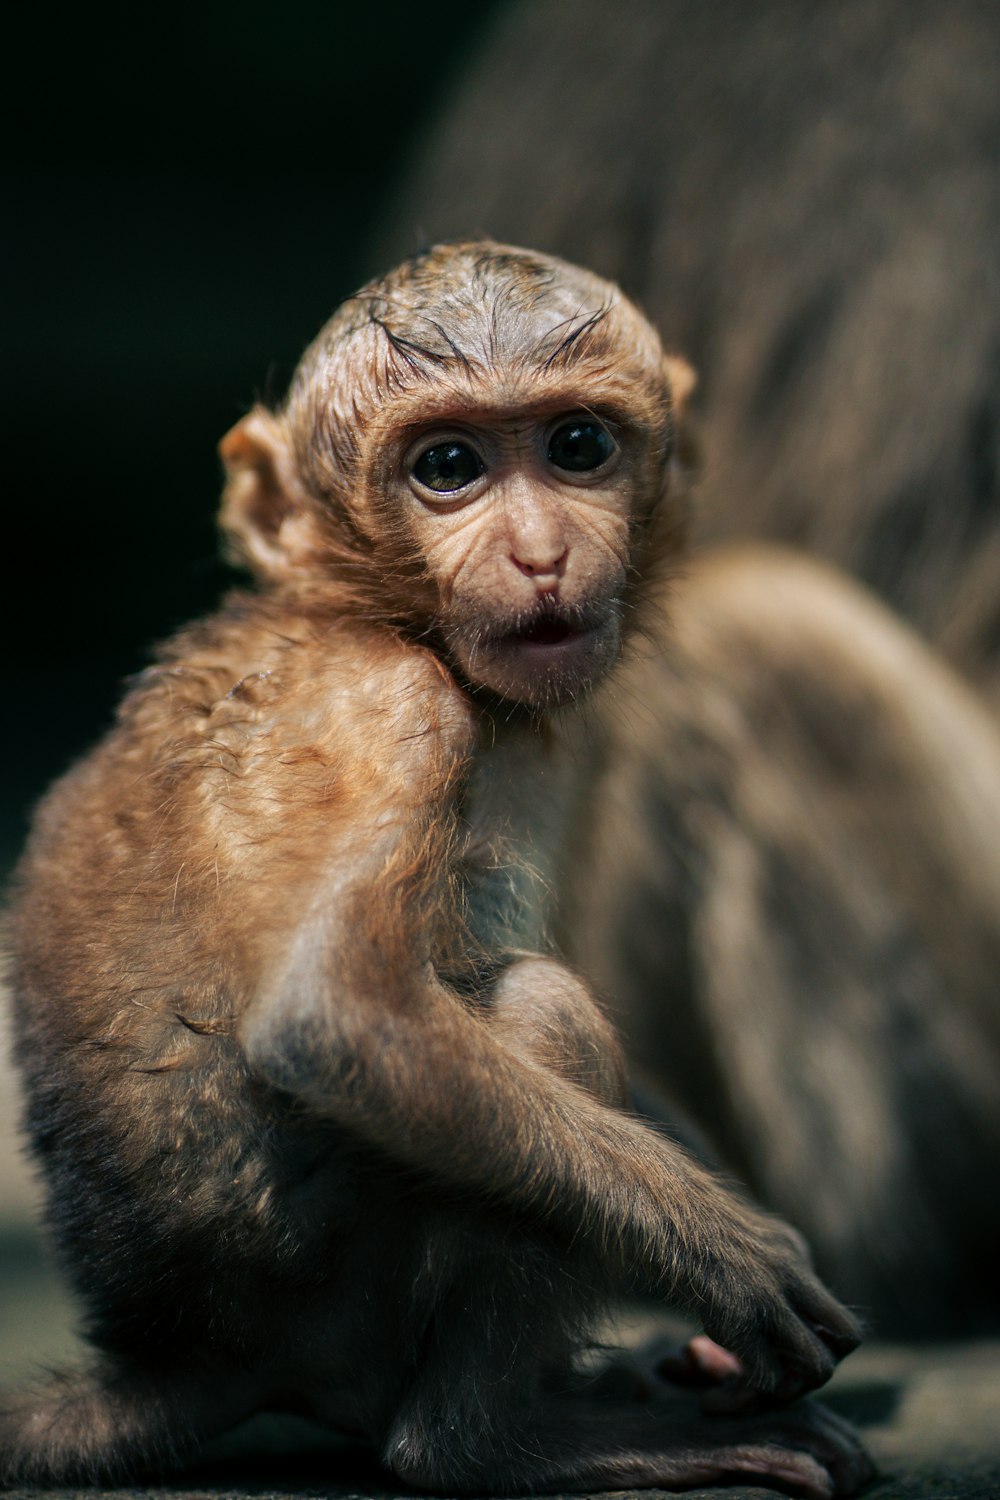 a small monkey sitting on the ground looking at the camera